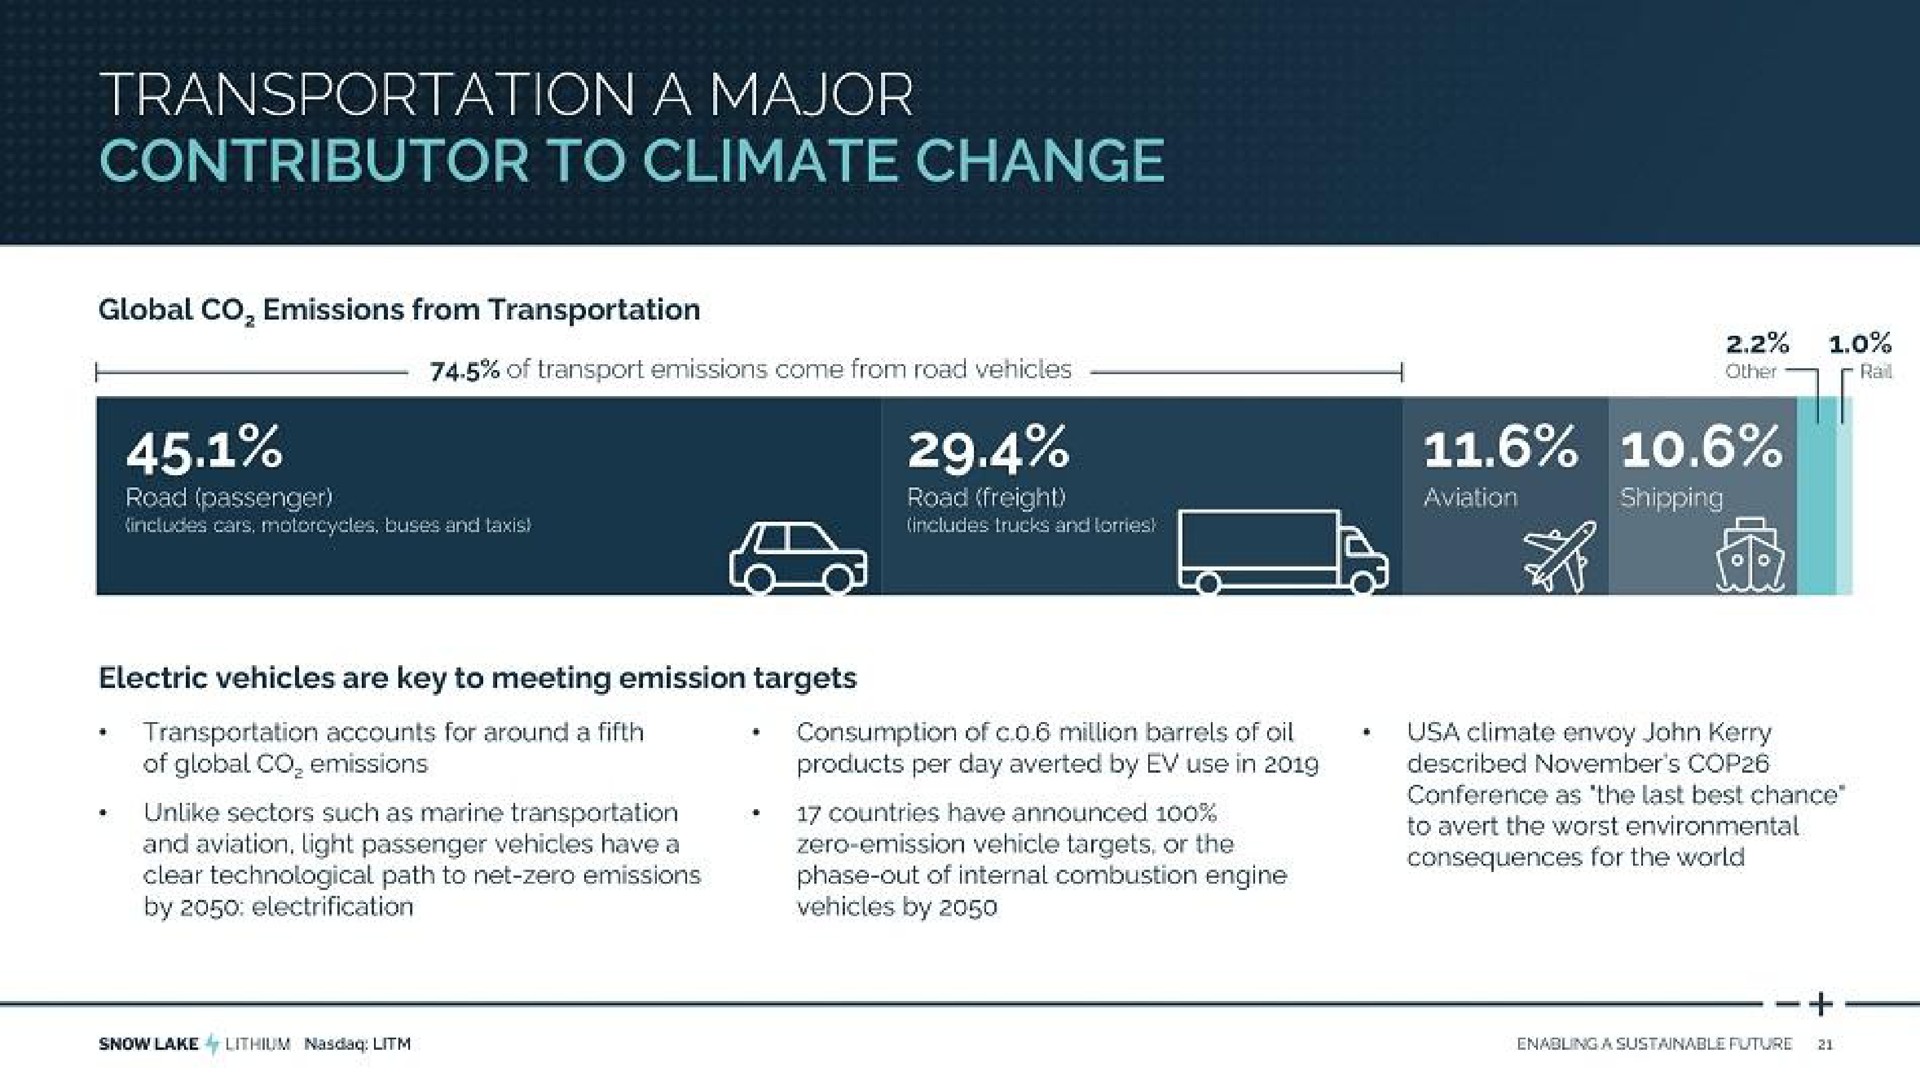 transportation a major contributor to climate change | Snow Lake Resources